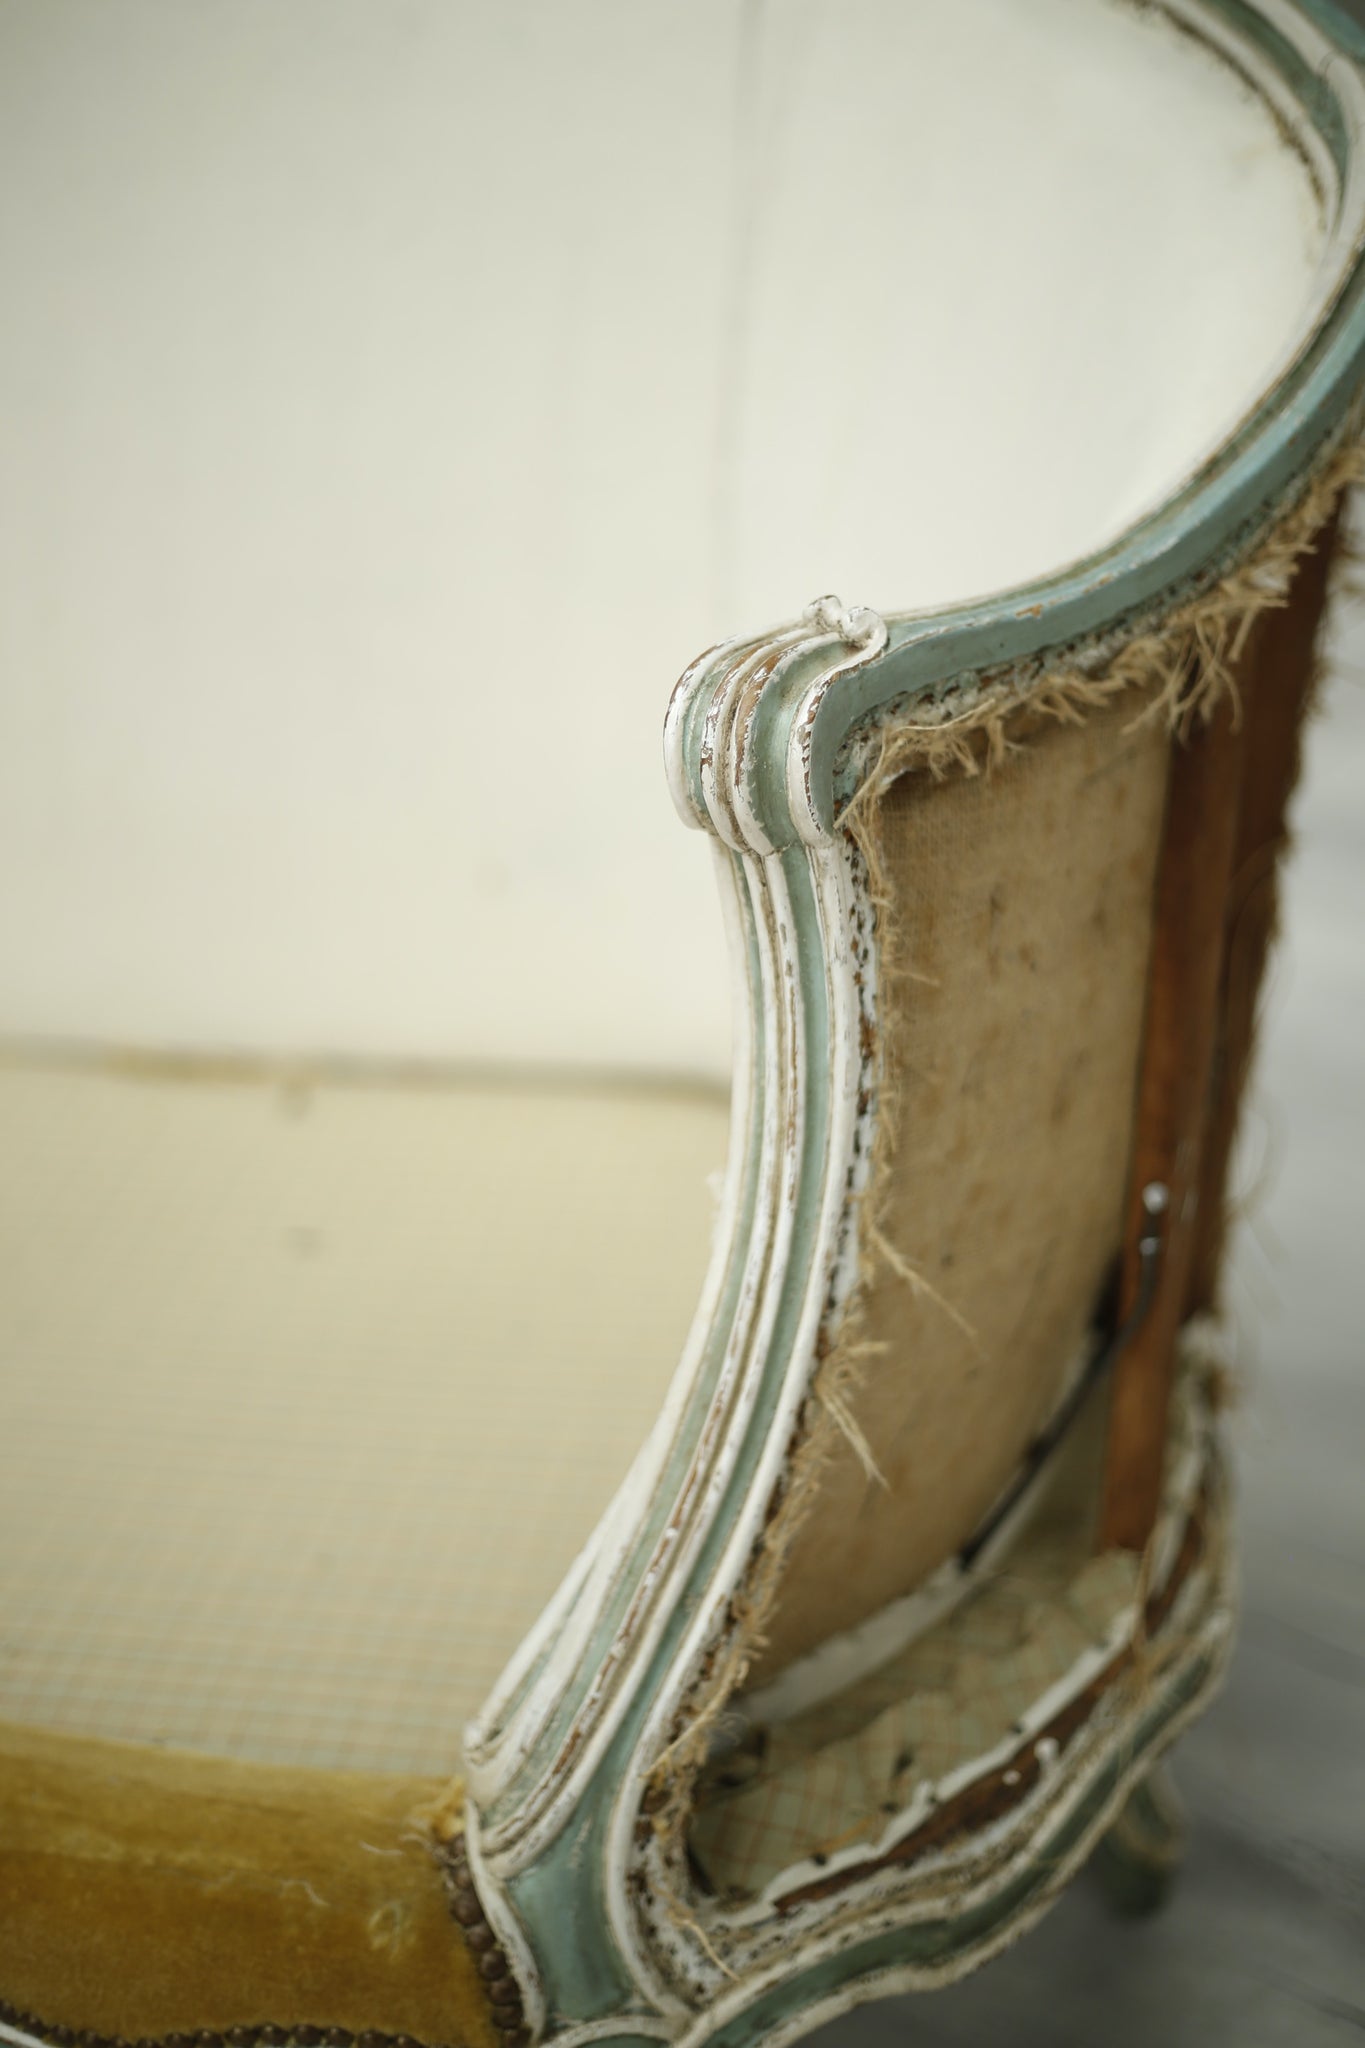 19th century antique French sofa with painted frame - TallBoy Interiors